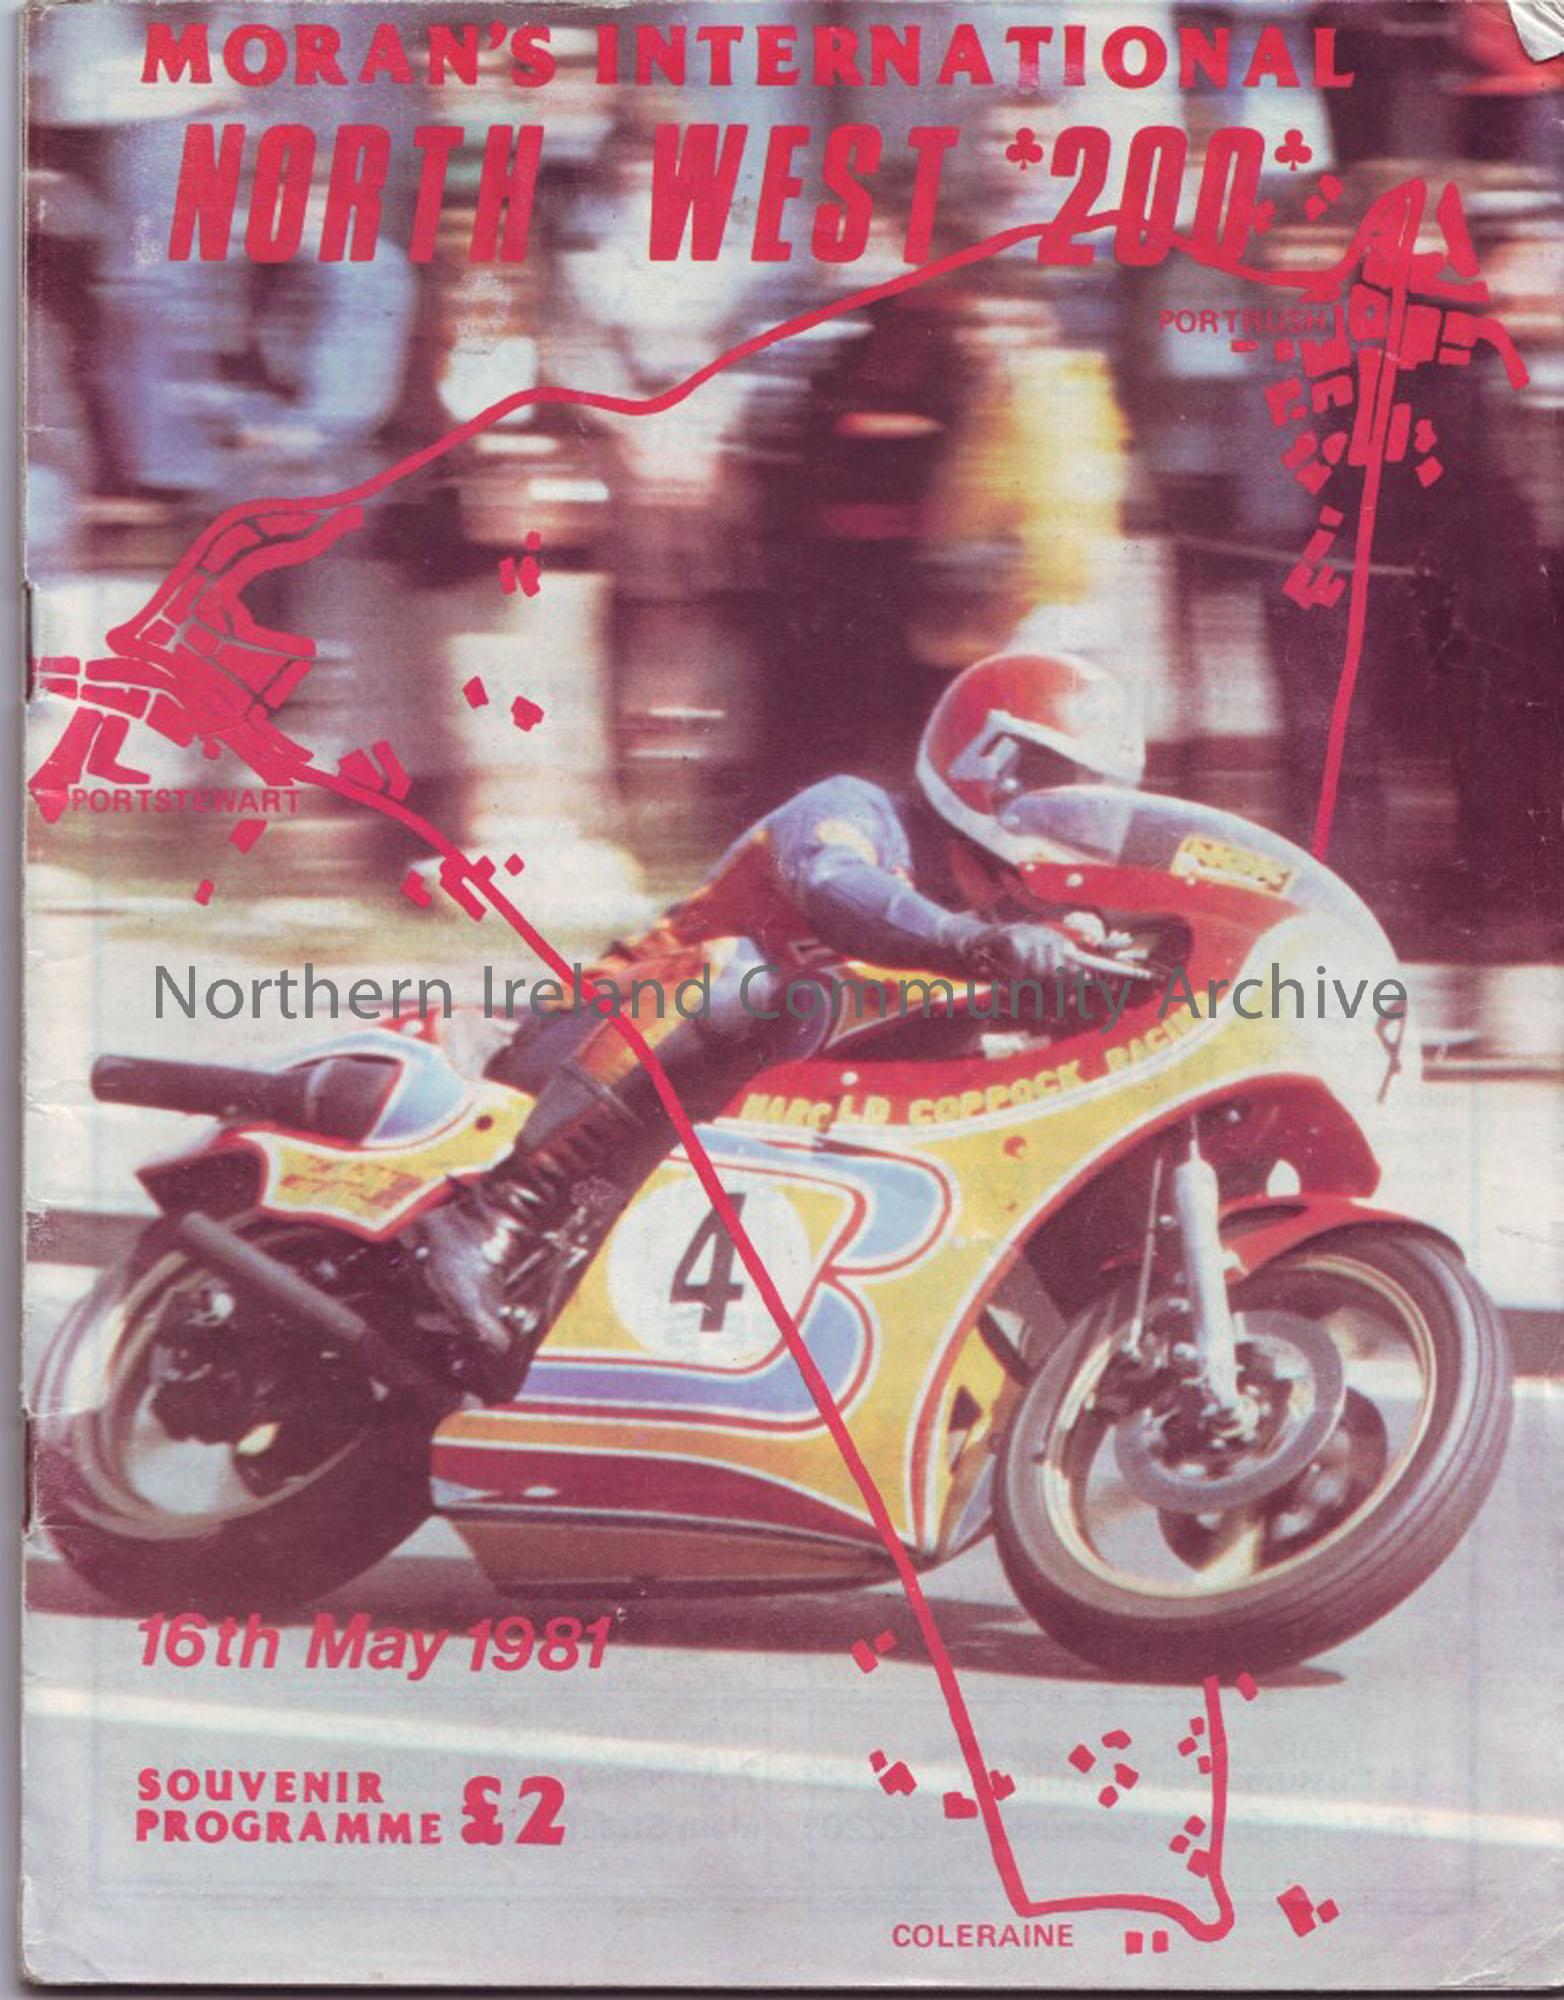 Souvenir Programme of the North West 200, 1981. Includes lists of Entrants in each class and lap score charts.